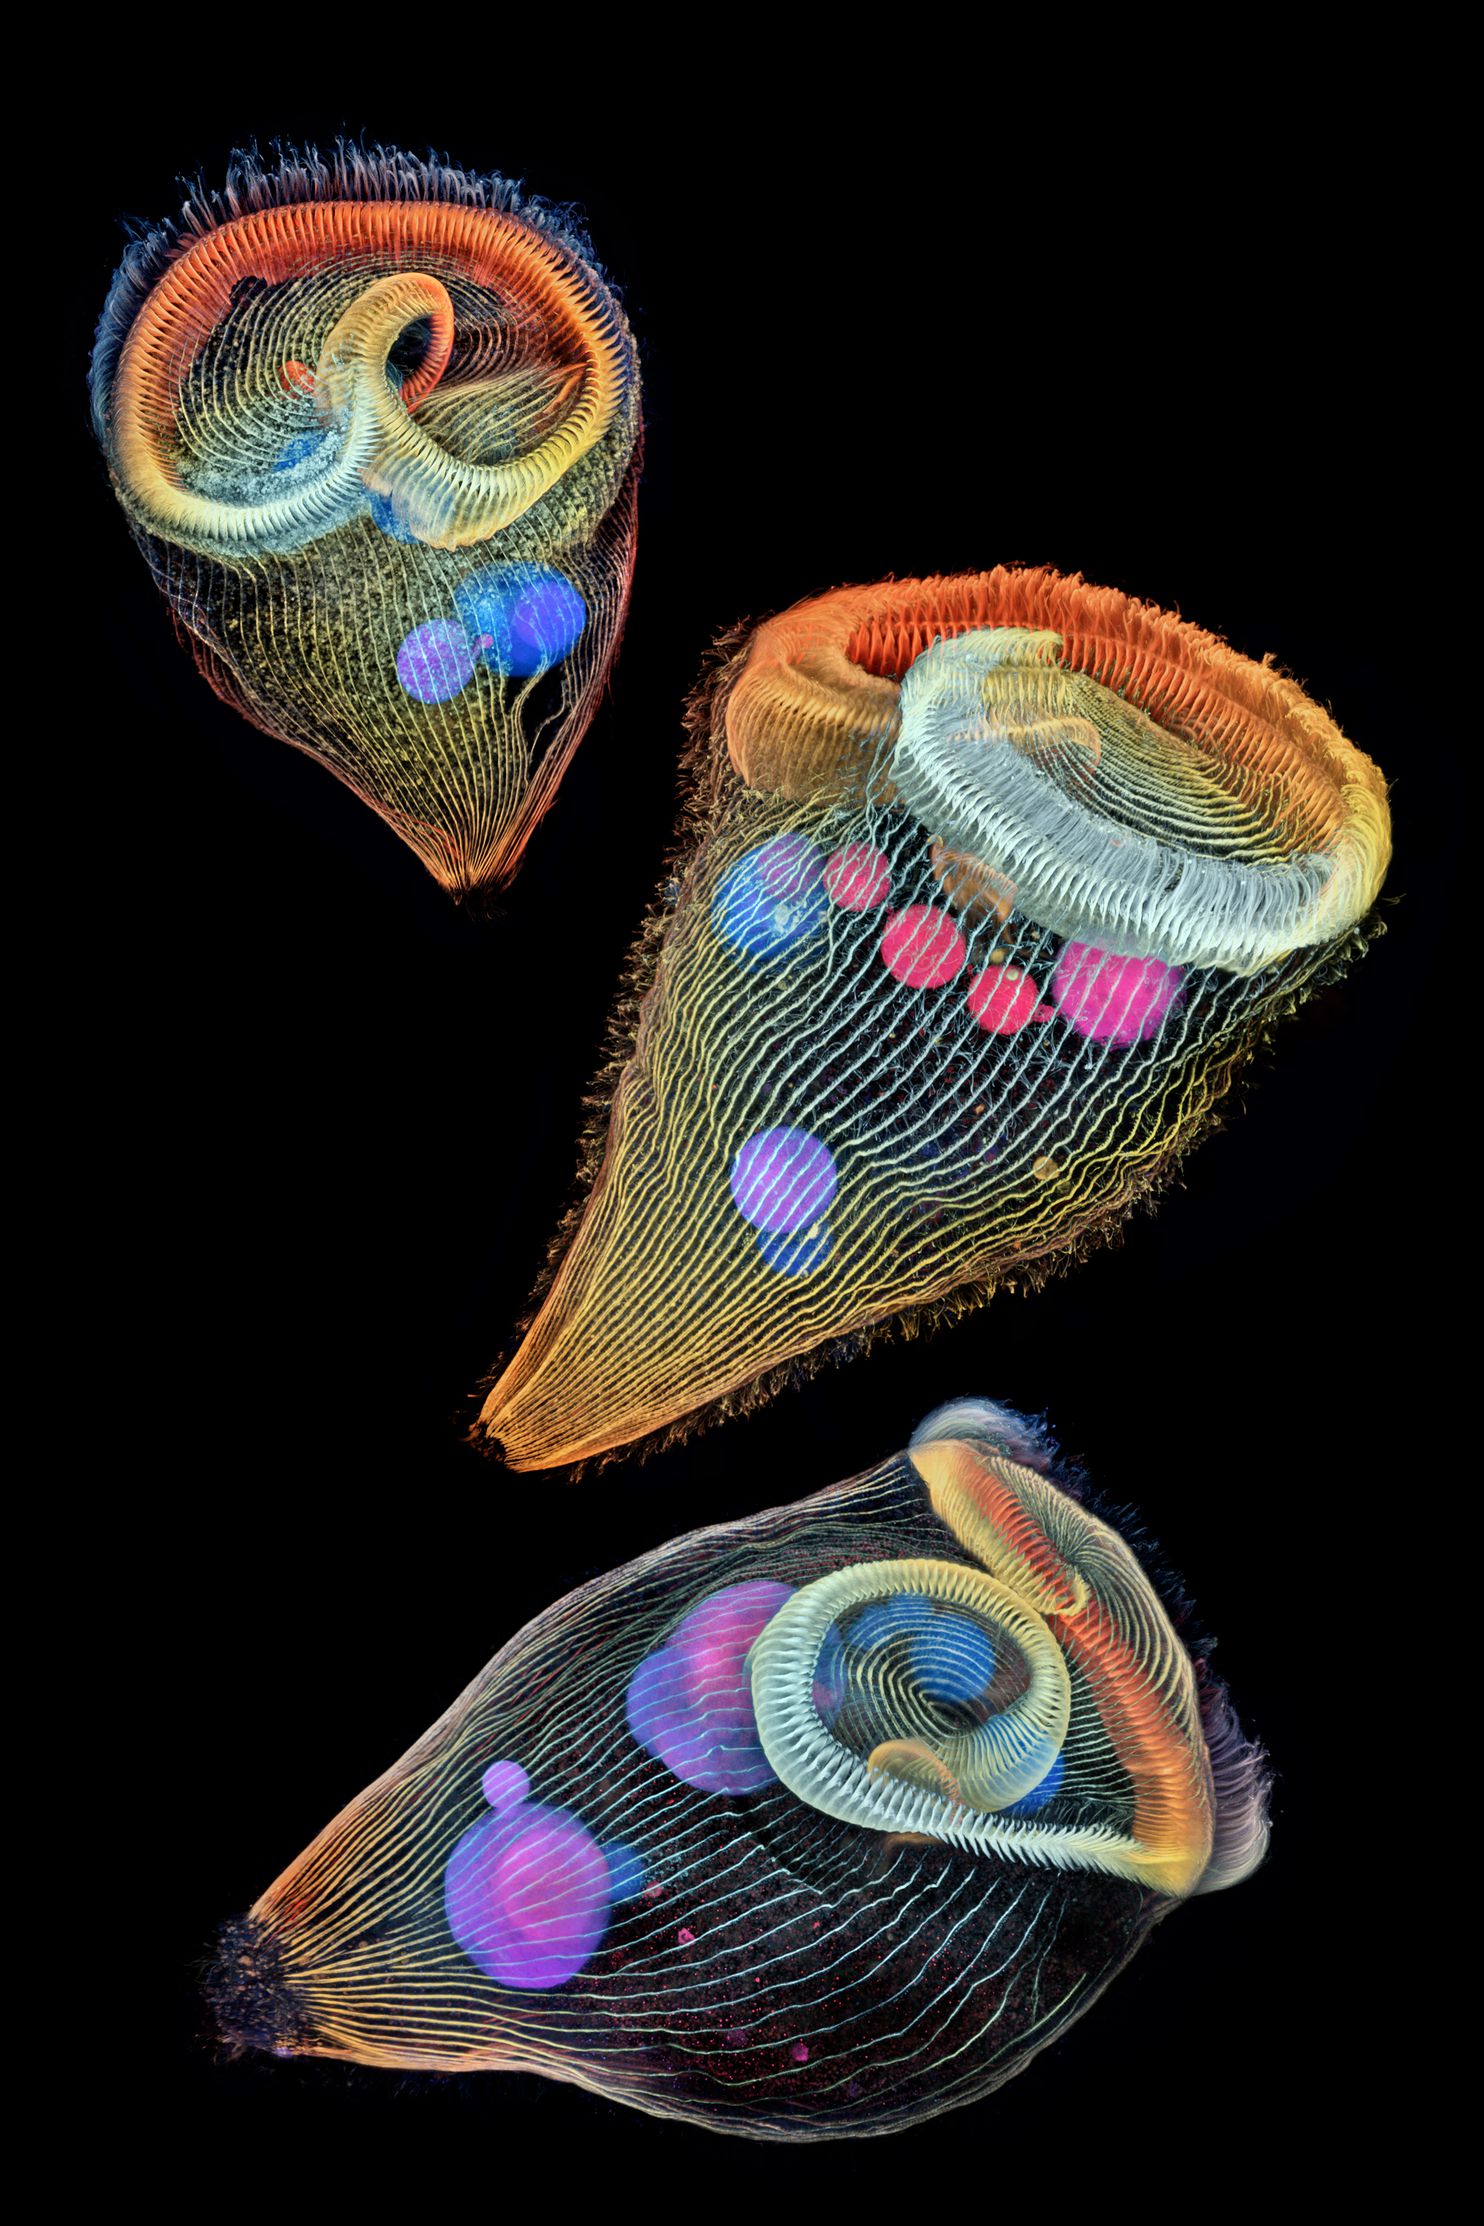 Depth-color-coded projection of three stentors (single-cell freshwater protozoans). Image credit: Dr Igor Siwanowicz/Nikon Small World